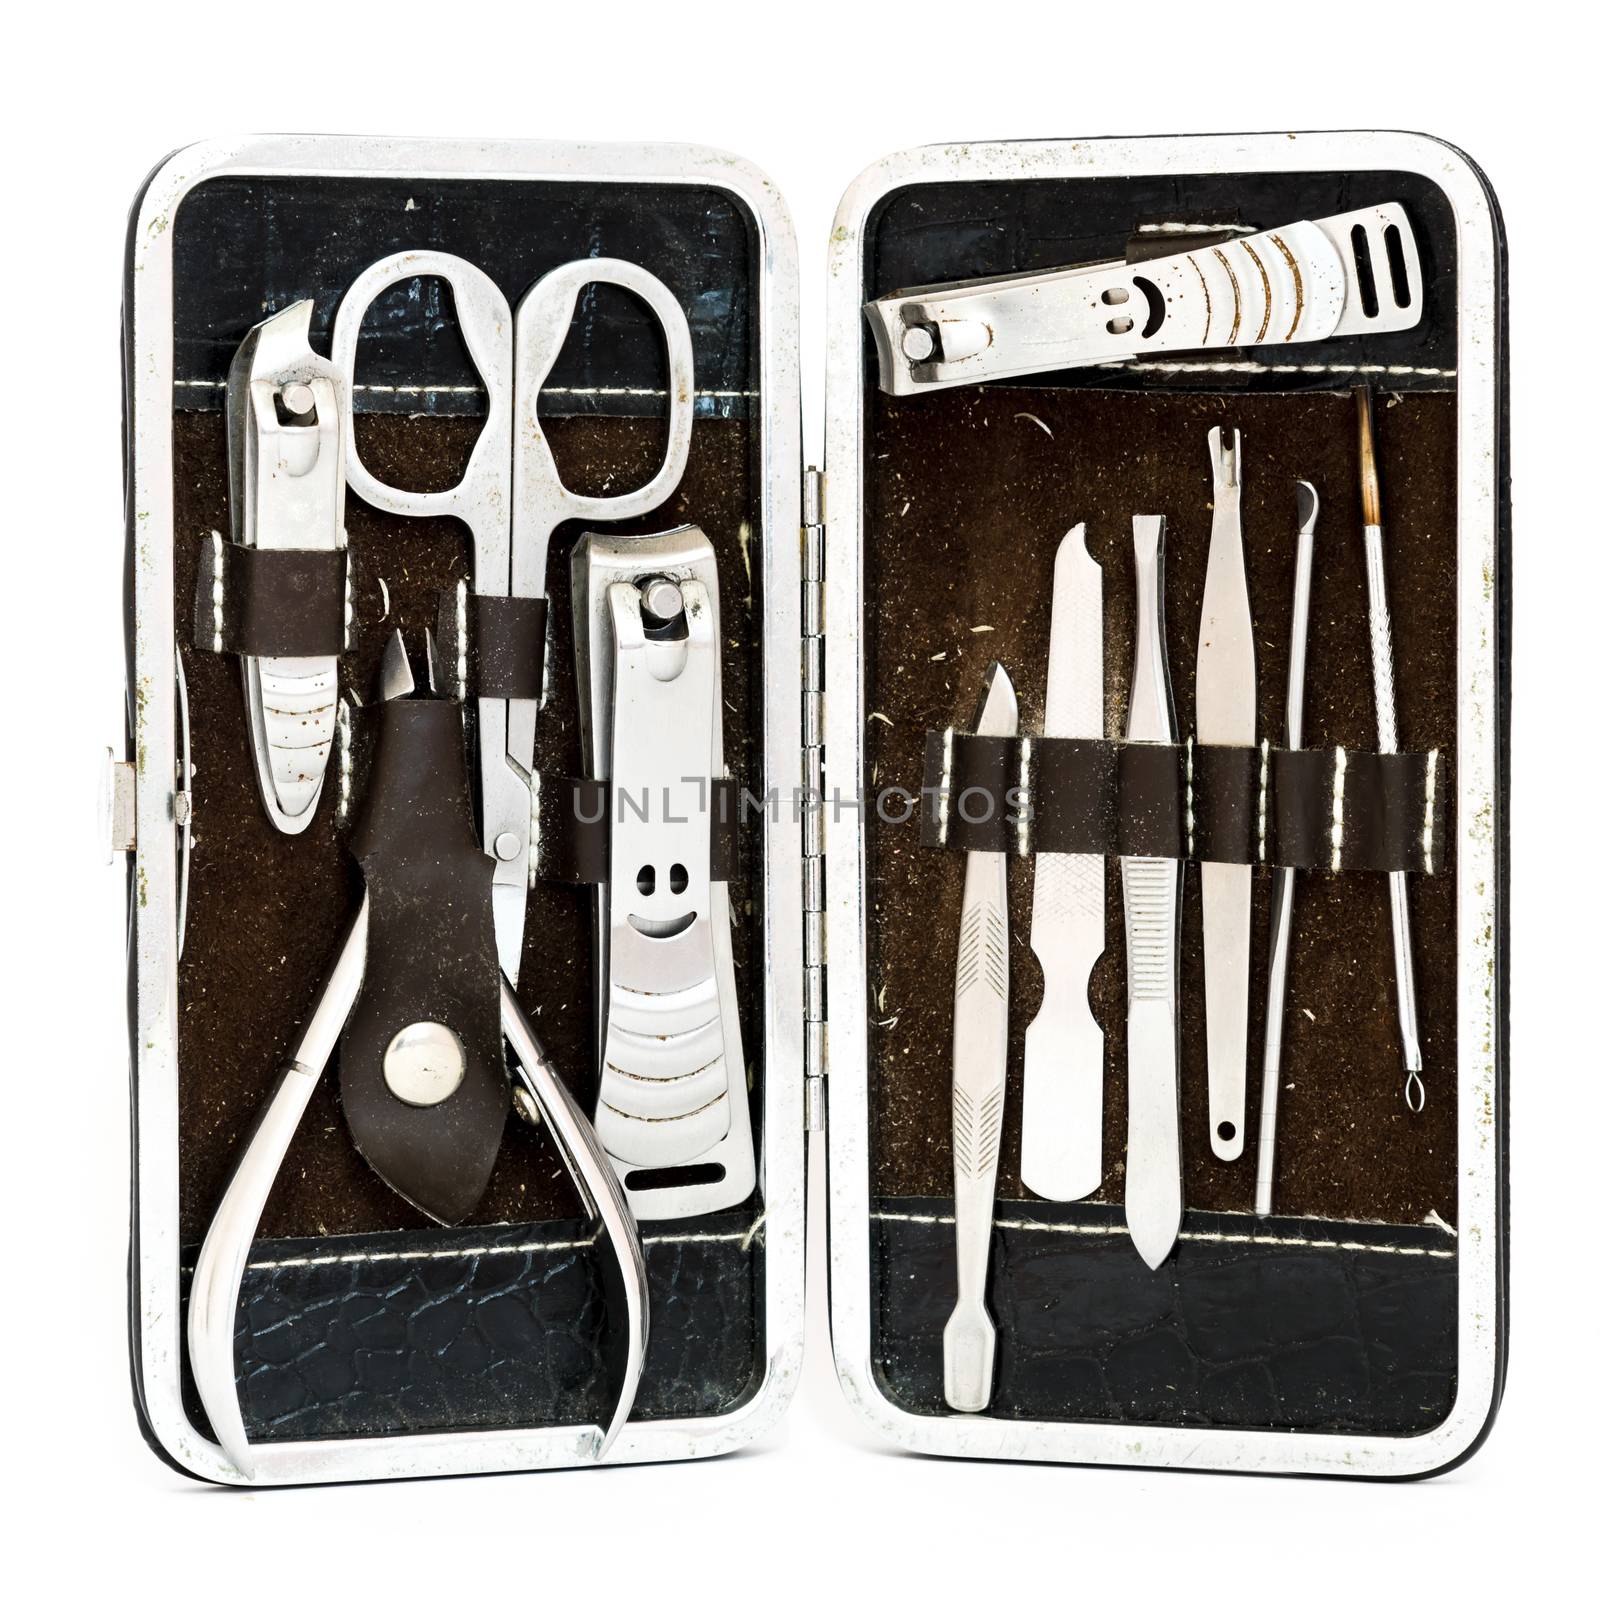 Studio shot top view grooming kit and nail tools in travel case isolated on white by trongnguyen